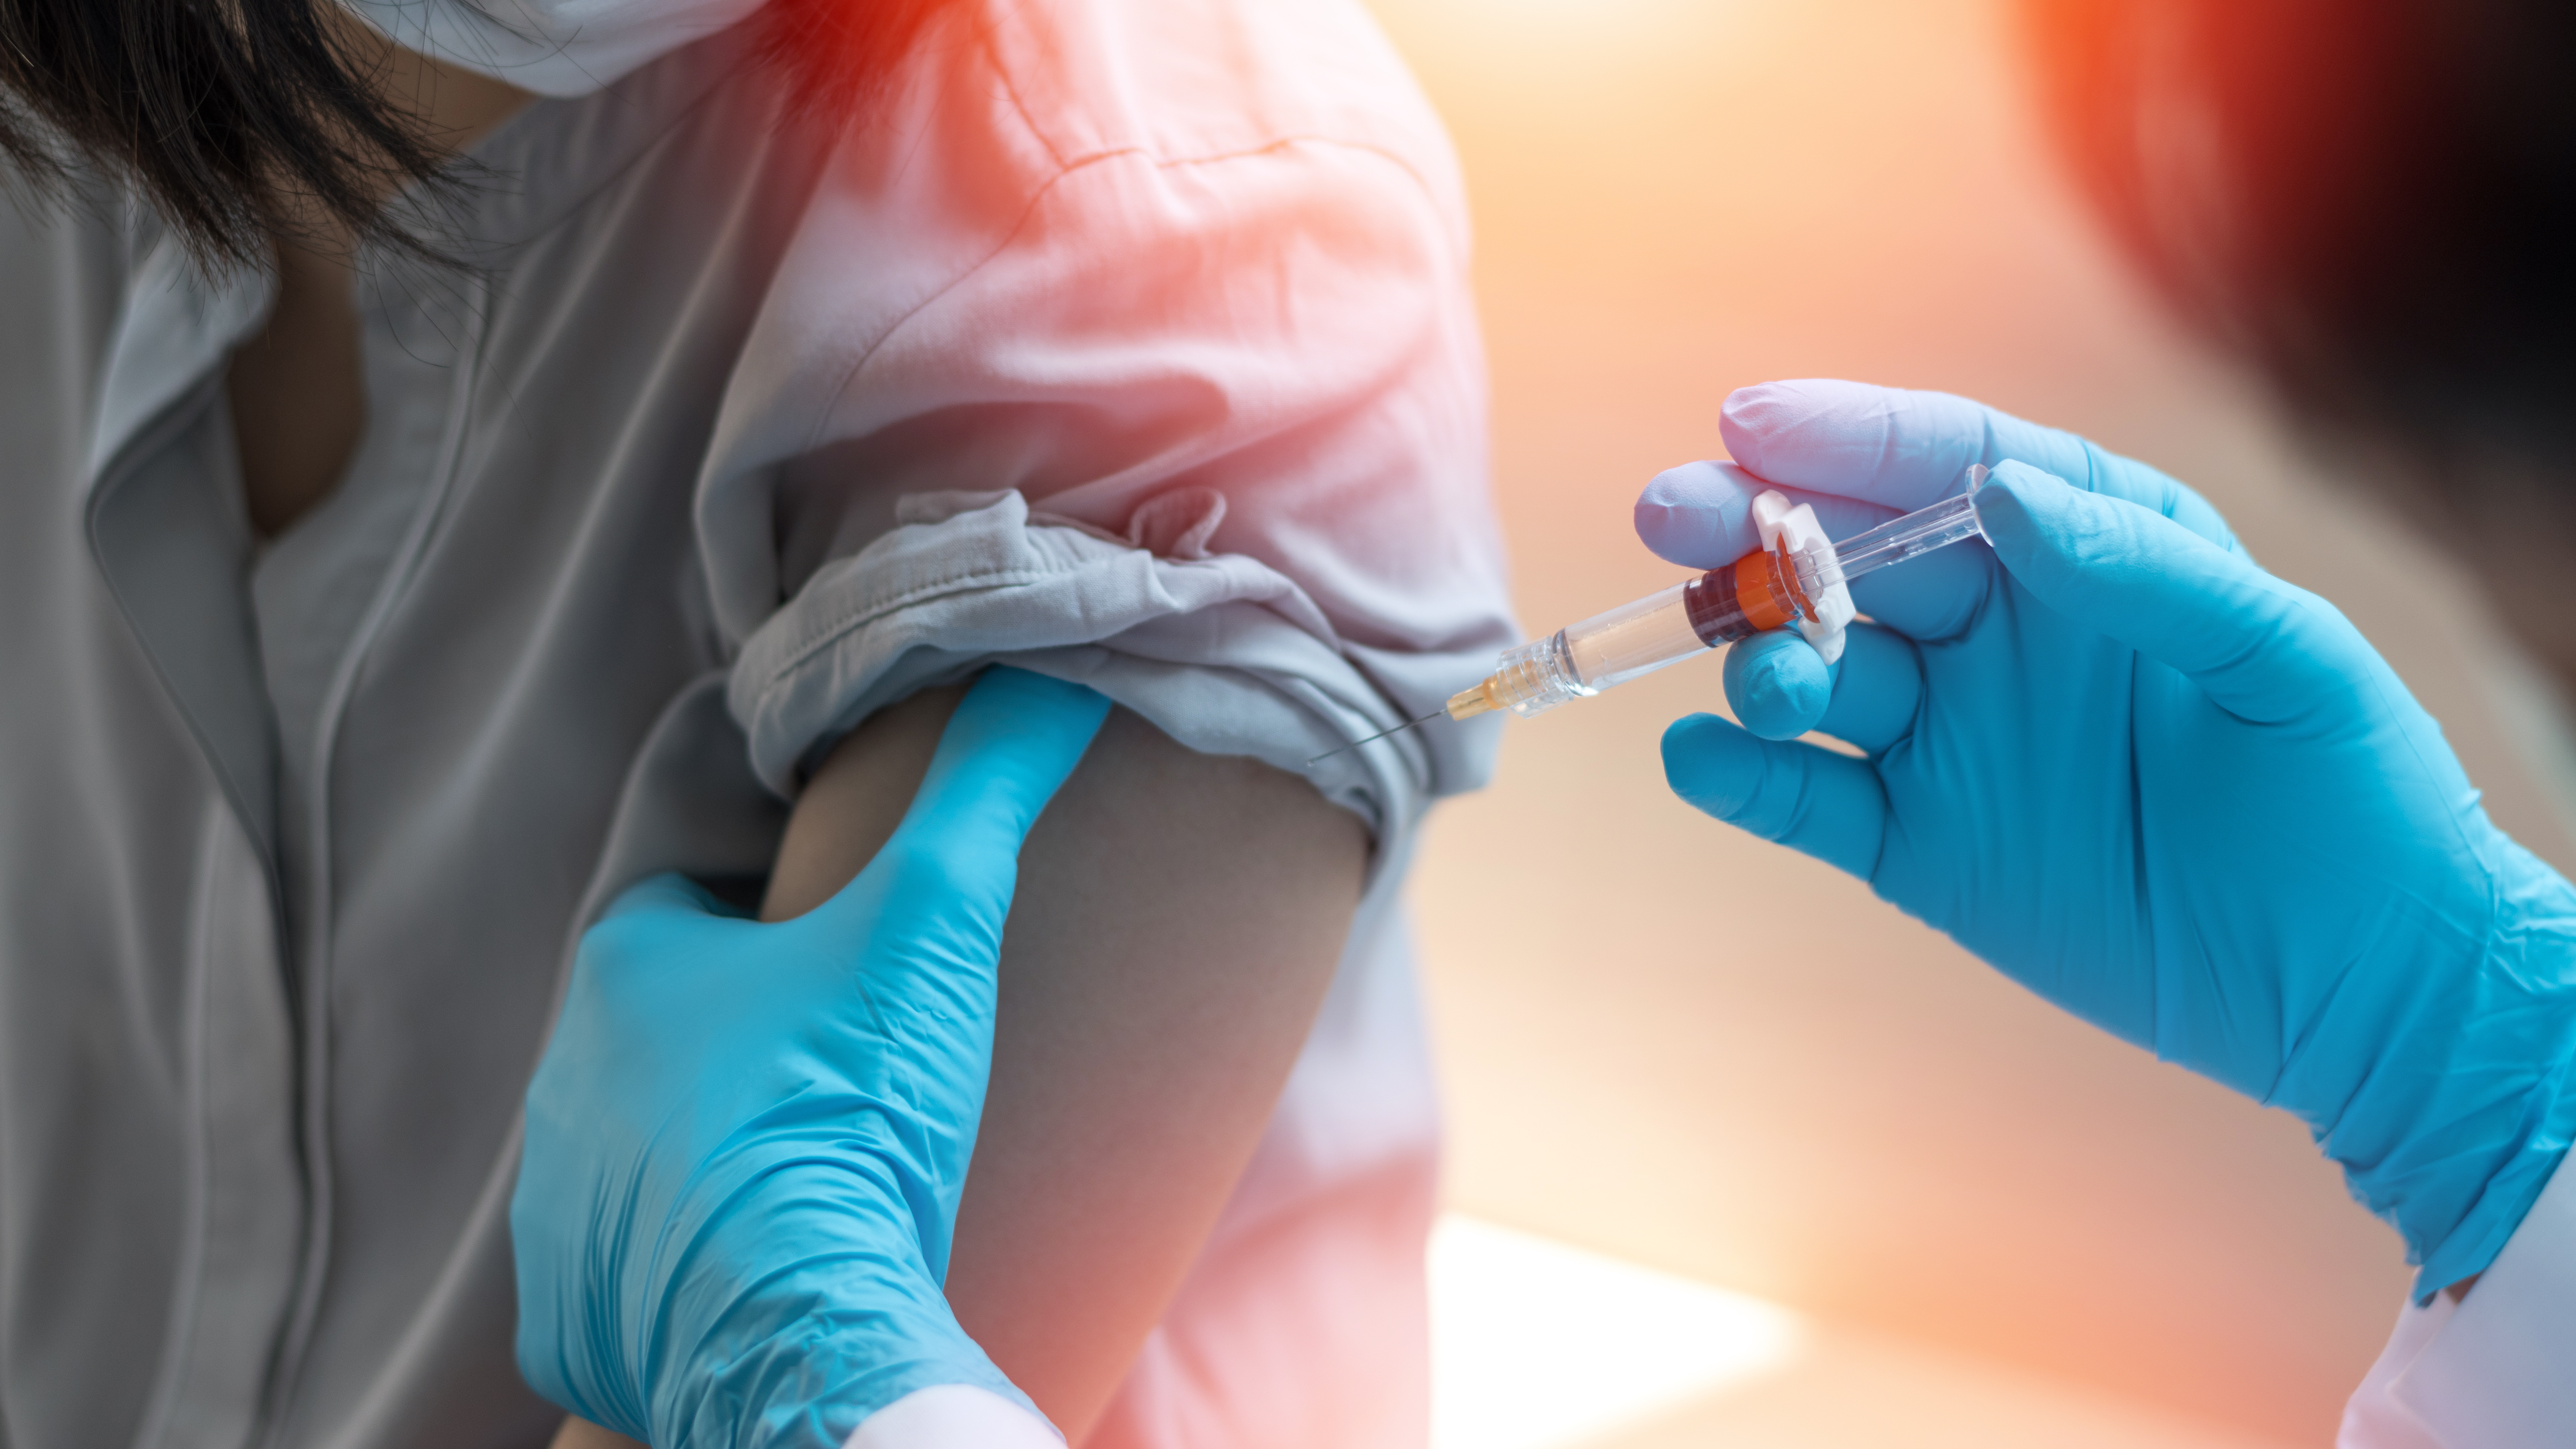 Image of blue gloved hands administering a vaccine to an arm with a rolled up sleeve.